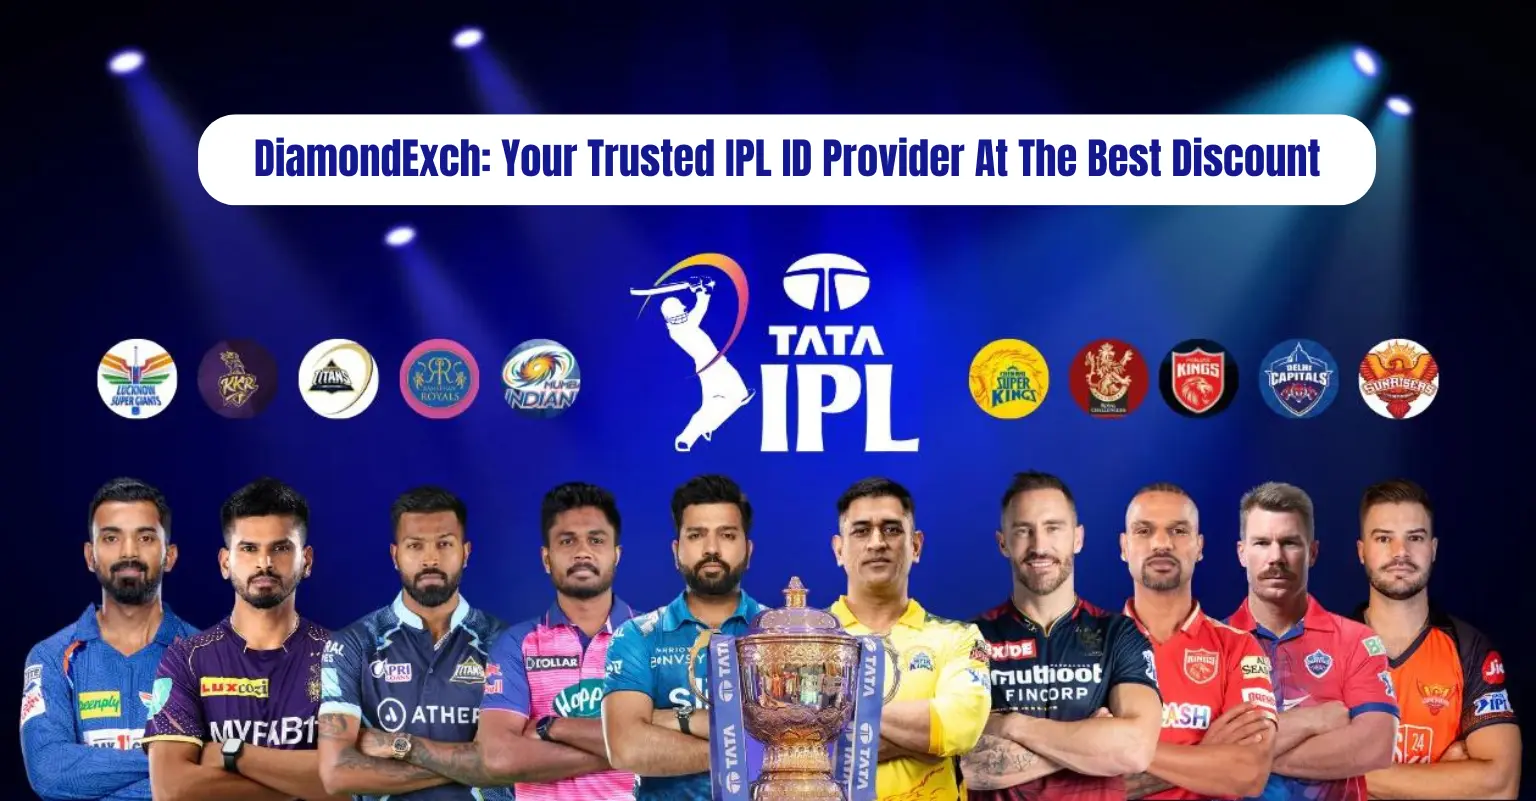 You are currently viewing DiamondExch: Your Trusted IPL ID Provider At The Best Discount